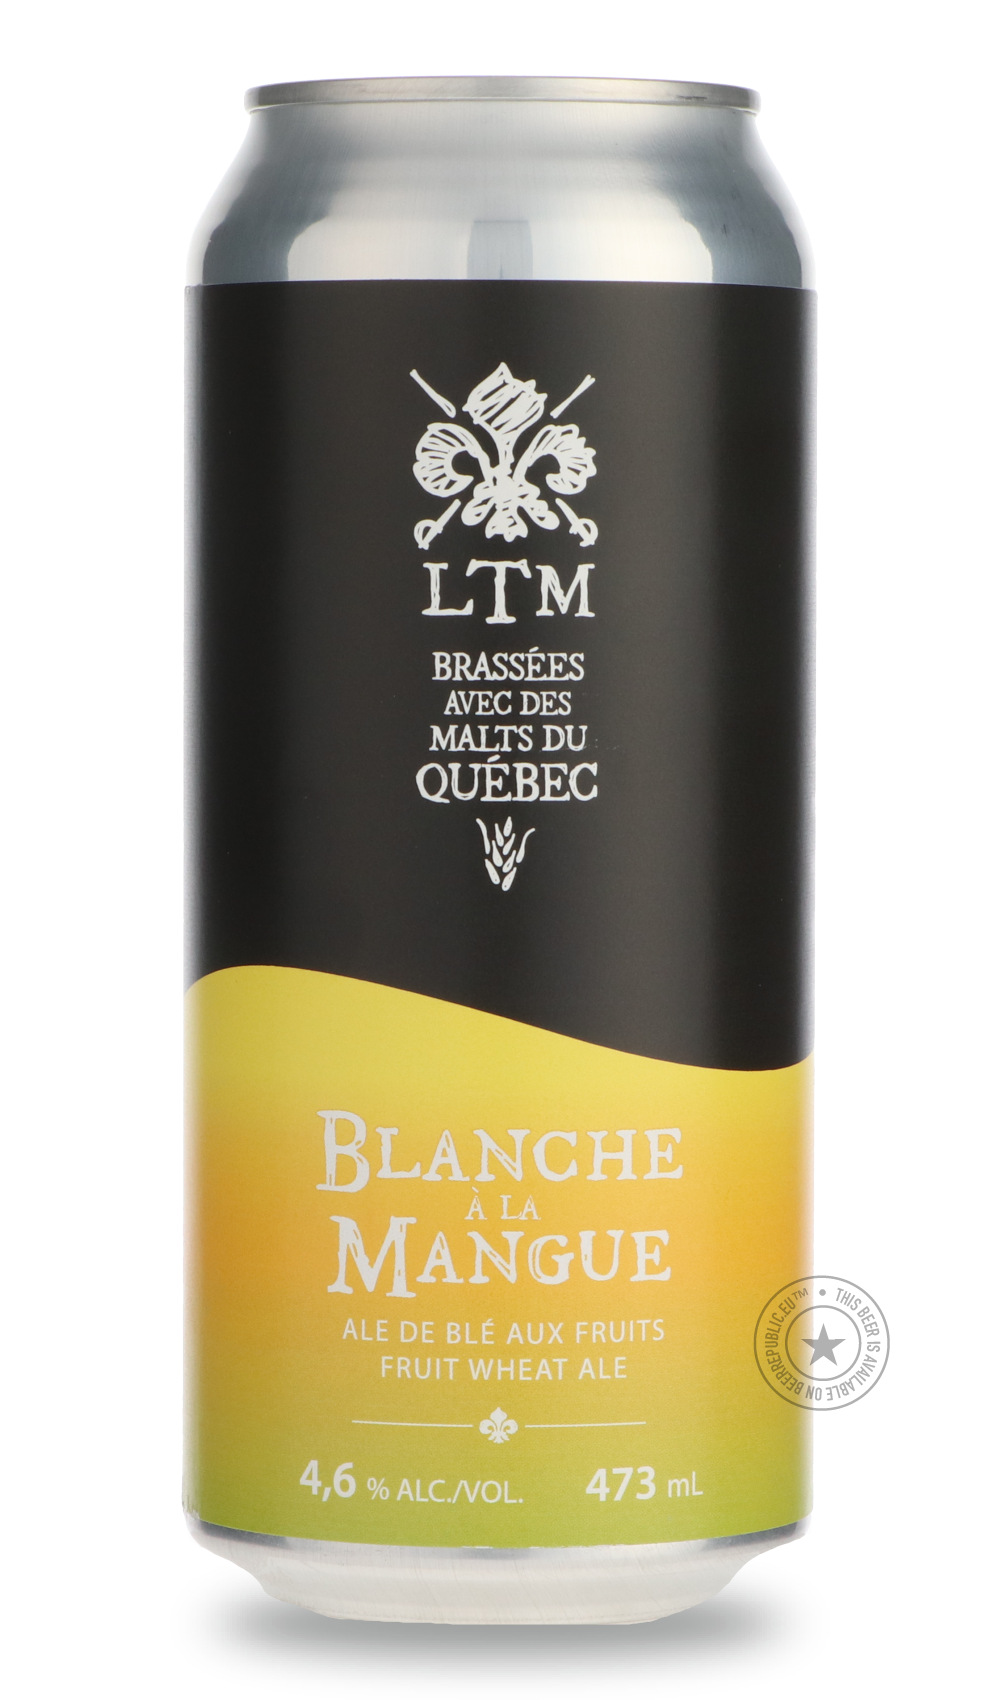 -Les Trois Mousquetaires- Blanche à La Mangue-Sour / Wild & Fruity- Only @ Beer Republic - The best online beer store for American & Canadian craft beer - Buy beer online from the USA and Canada - Bier online kopen - Amerikaans bier kopen - Craft beer store - Craft beer kopen - Amerikanisch bier kaufen - Bier online kaufen - Acheter biere online - IPA - Stout - Porter - New England IPA - Hazy IPA - Imperial Stout - Barrel Aged - Barrel Aged Imperial Stout - Brown - Dark beer - Blond - Blonde - Pilsner - Lag